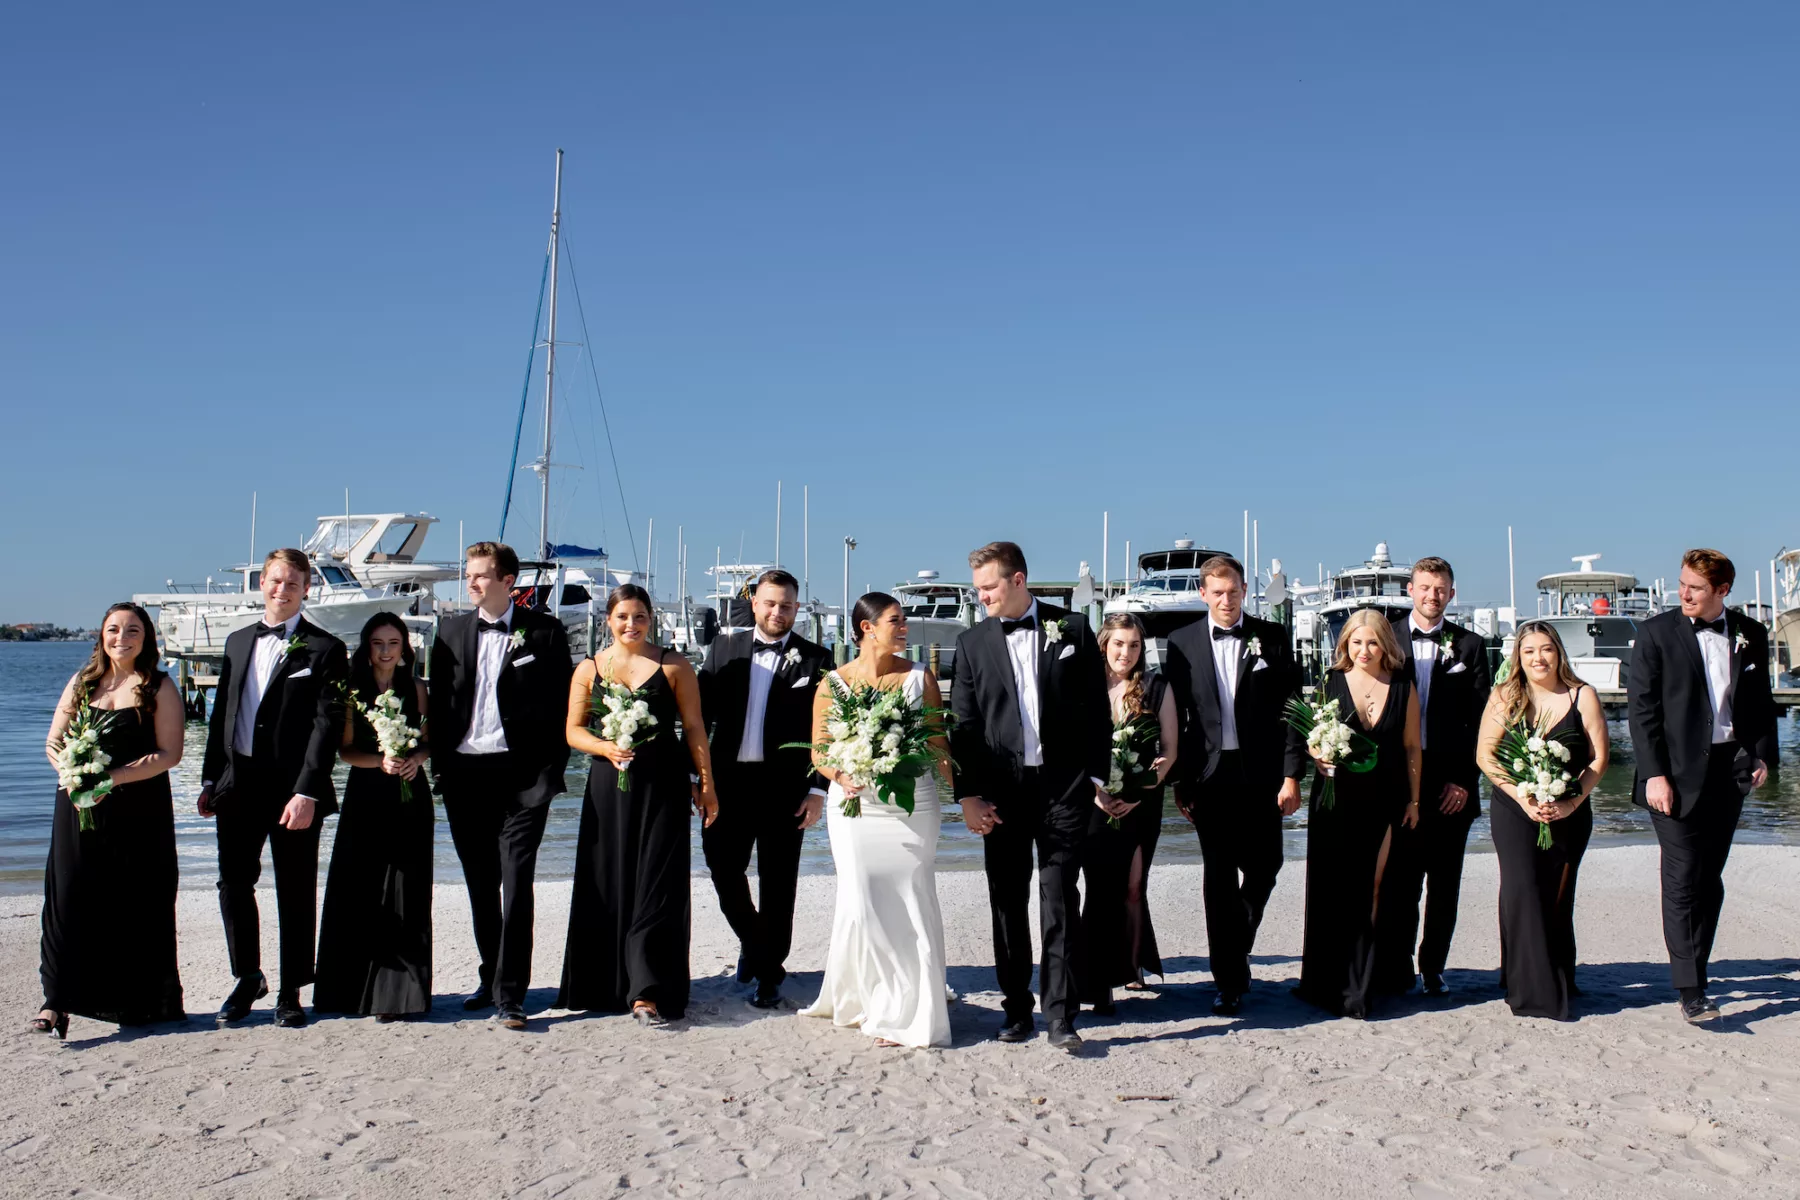 Bridal Party Wearing Black Suits and Mismatched Dresses Wedding Attire Inspiration | Tampa Bay Event Venue Isla Del Sol Yacht and Country Club